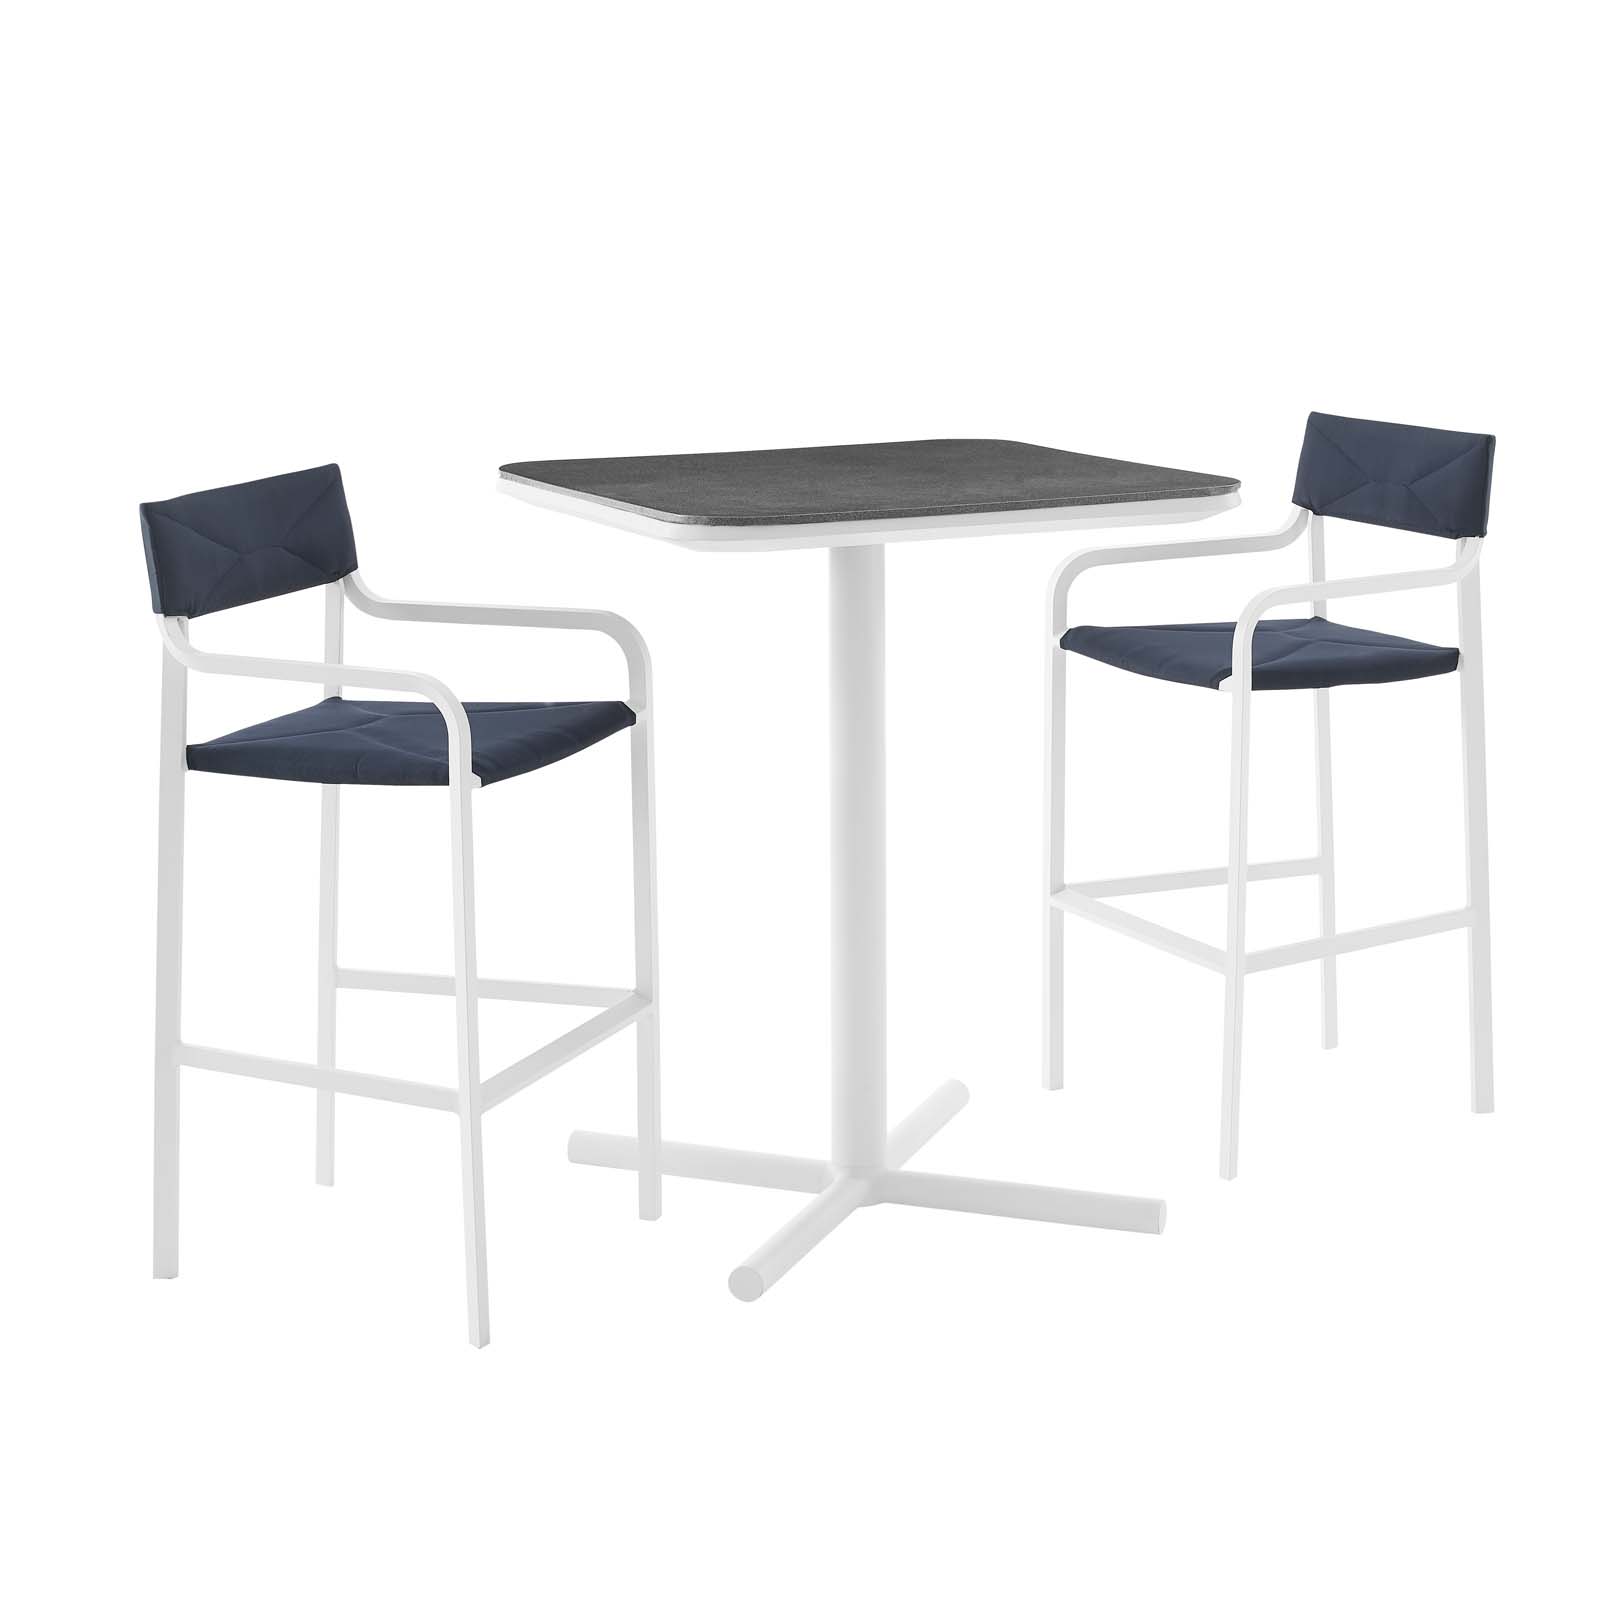 Modway Raleigh 3 Piece Outdoor Patio Aluminum Bar Set in White Navy - image 2 of 10